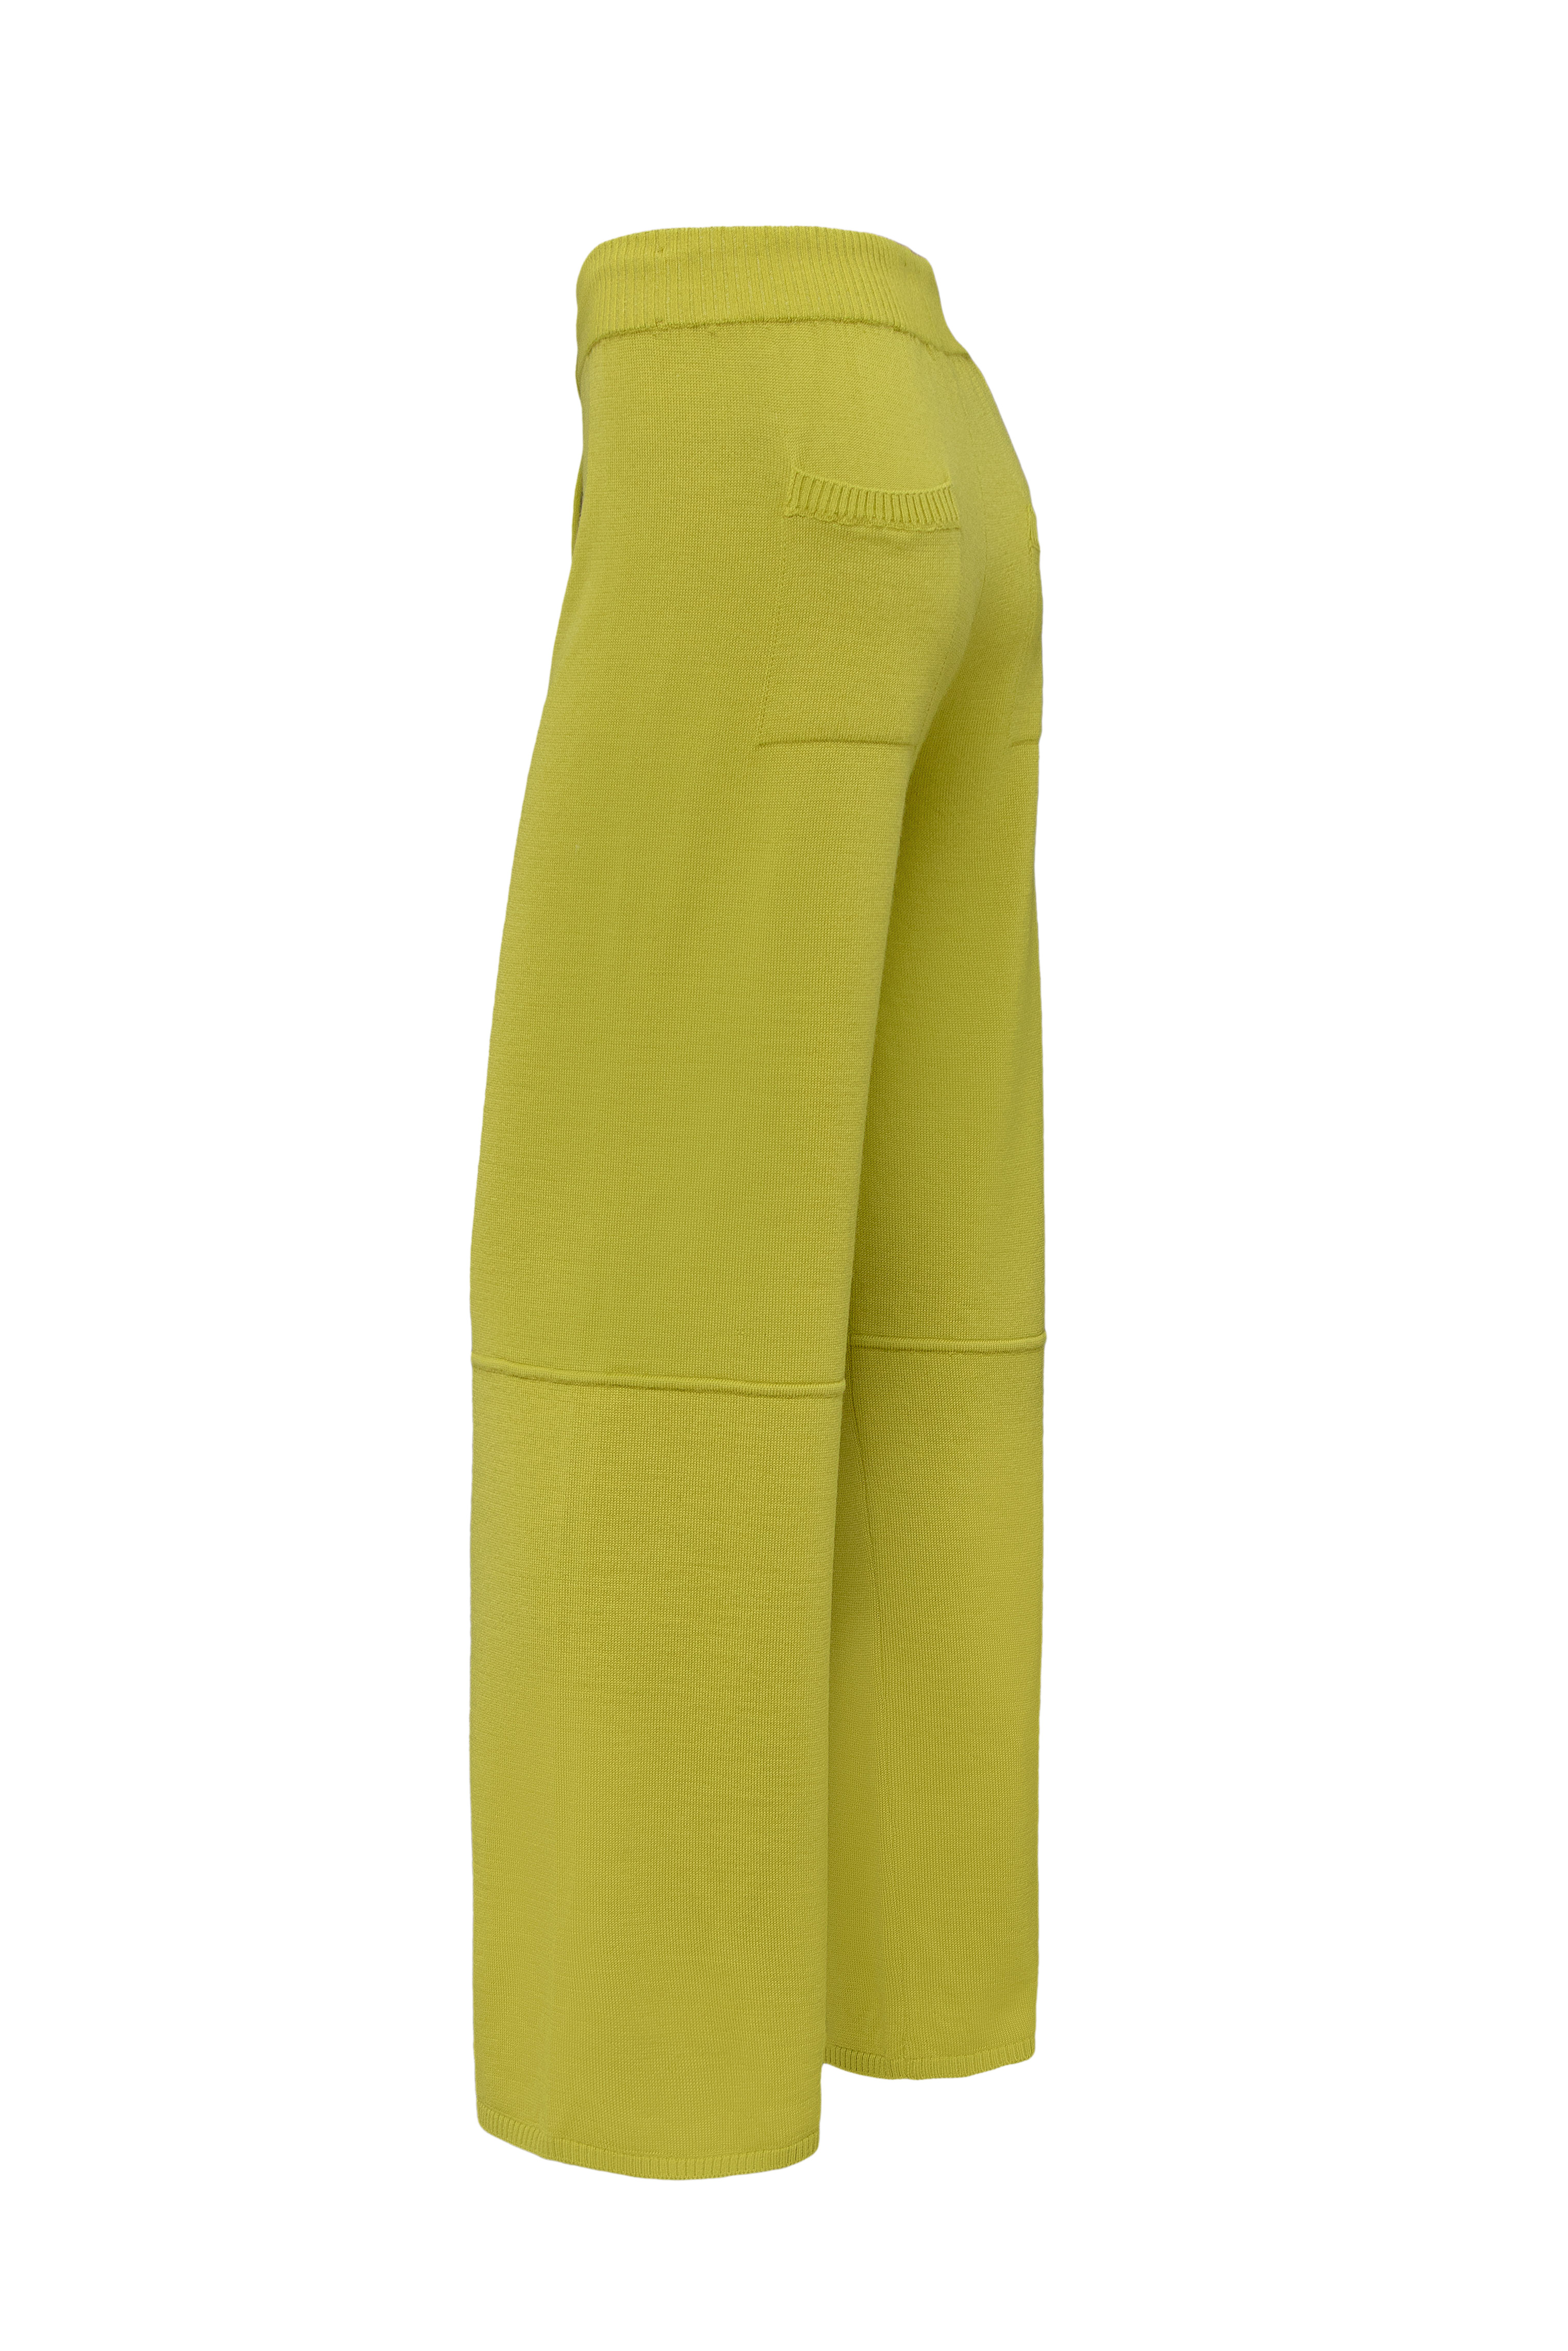 Trousers 4279-23 Yellow-Green from BRUSNiKA